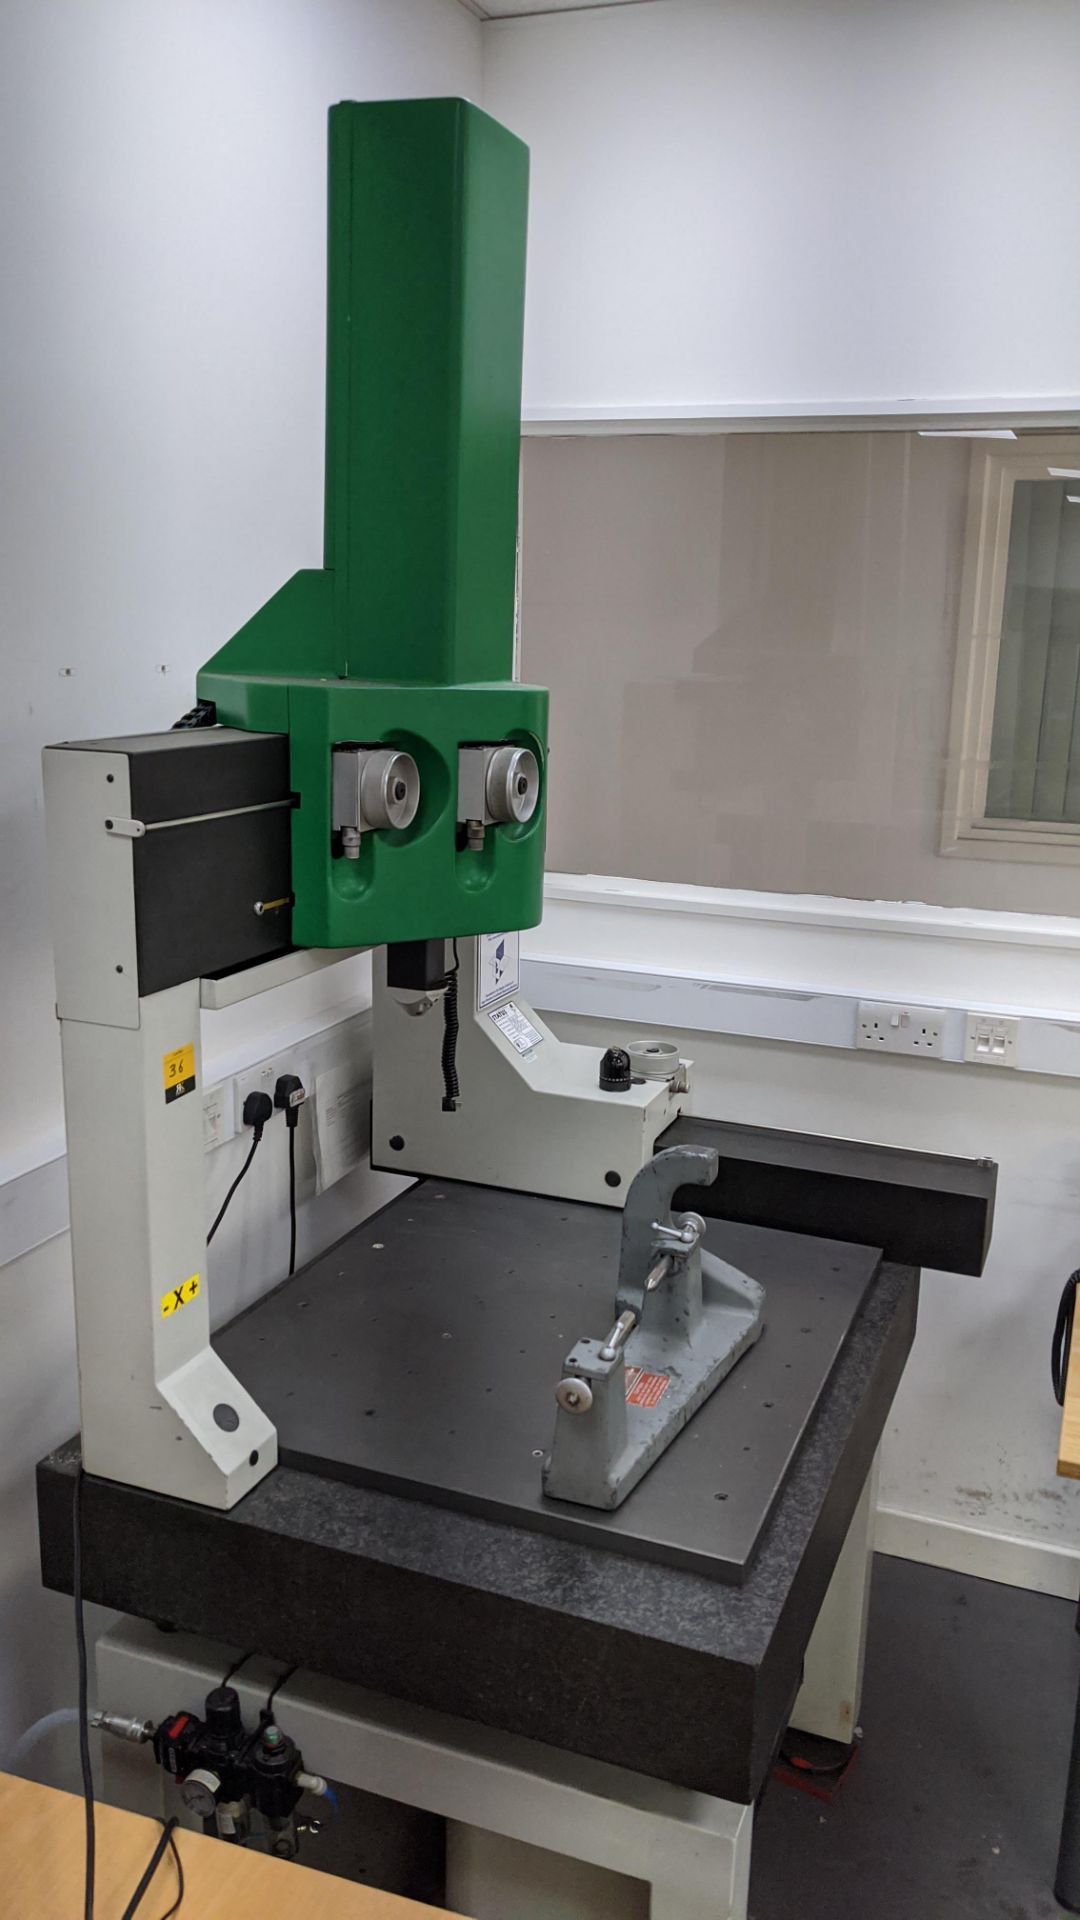 Coord 3 CMM on table measuring approx. 900mm x 780mm, including plate & bench centre as pictured. We - Image 11 of 12